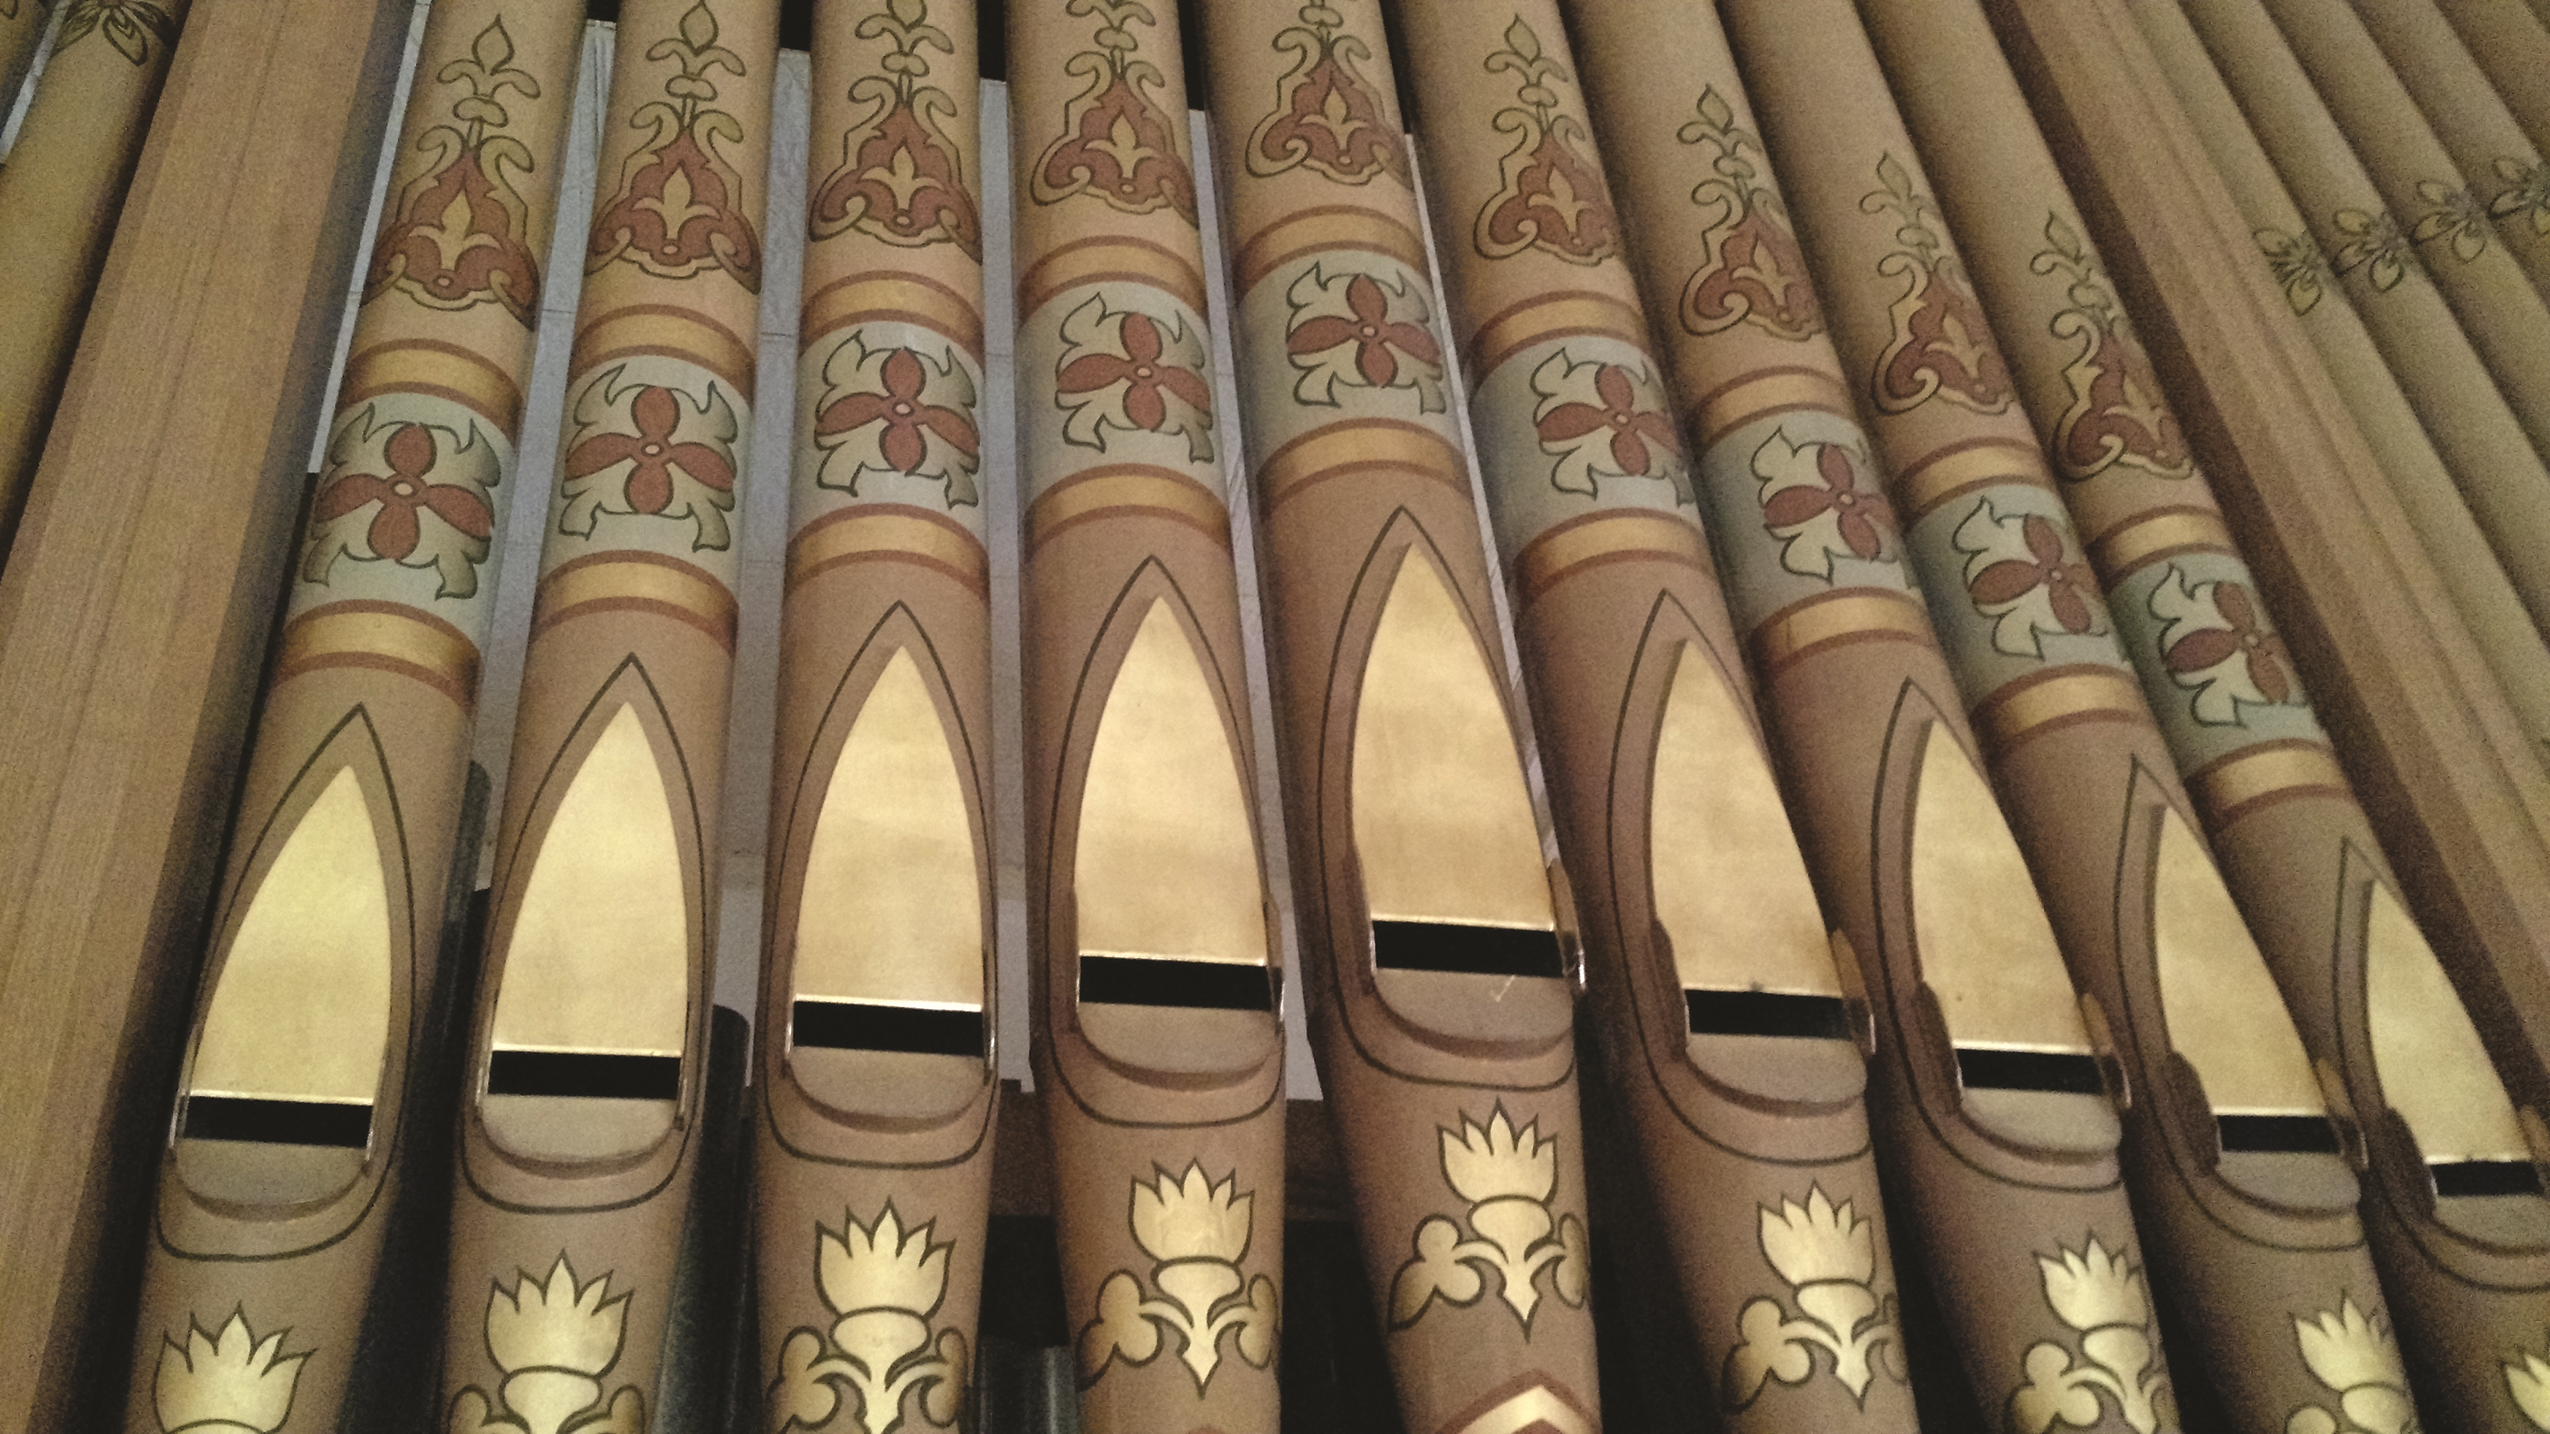 a row of organ pipes with designs on them